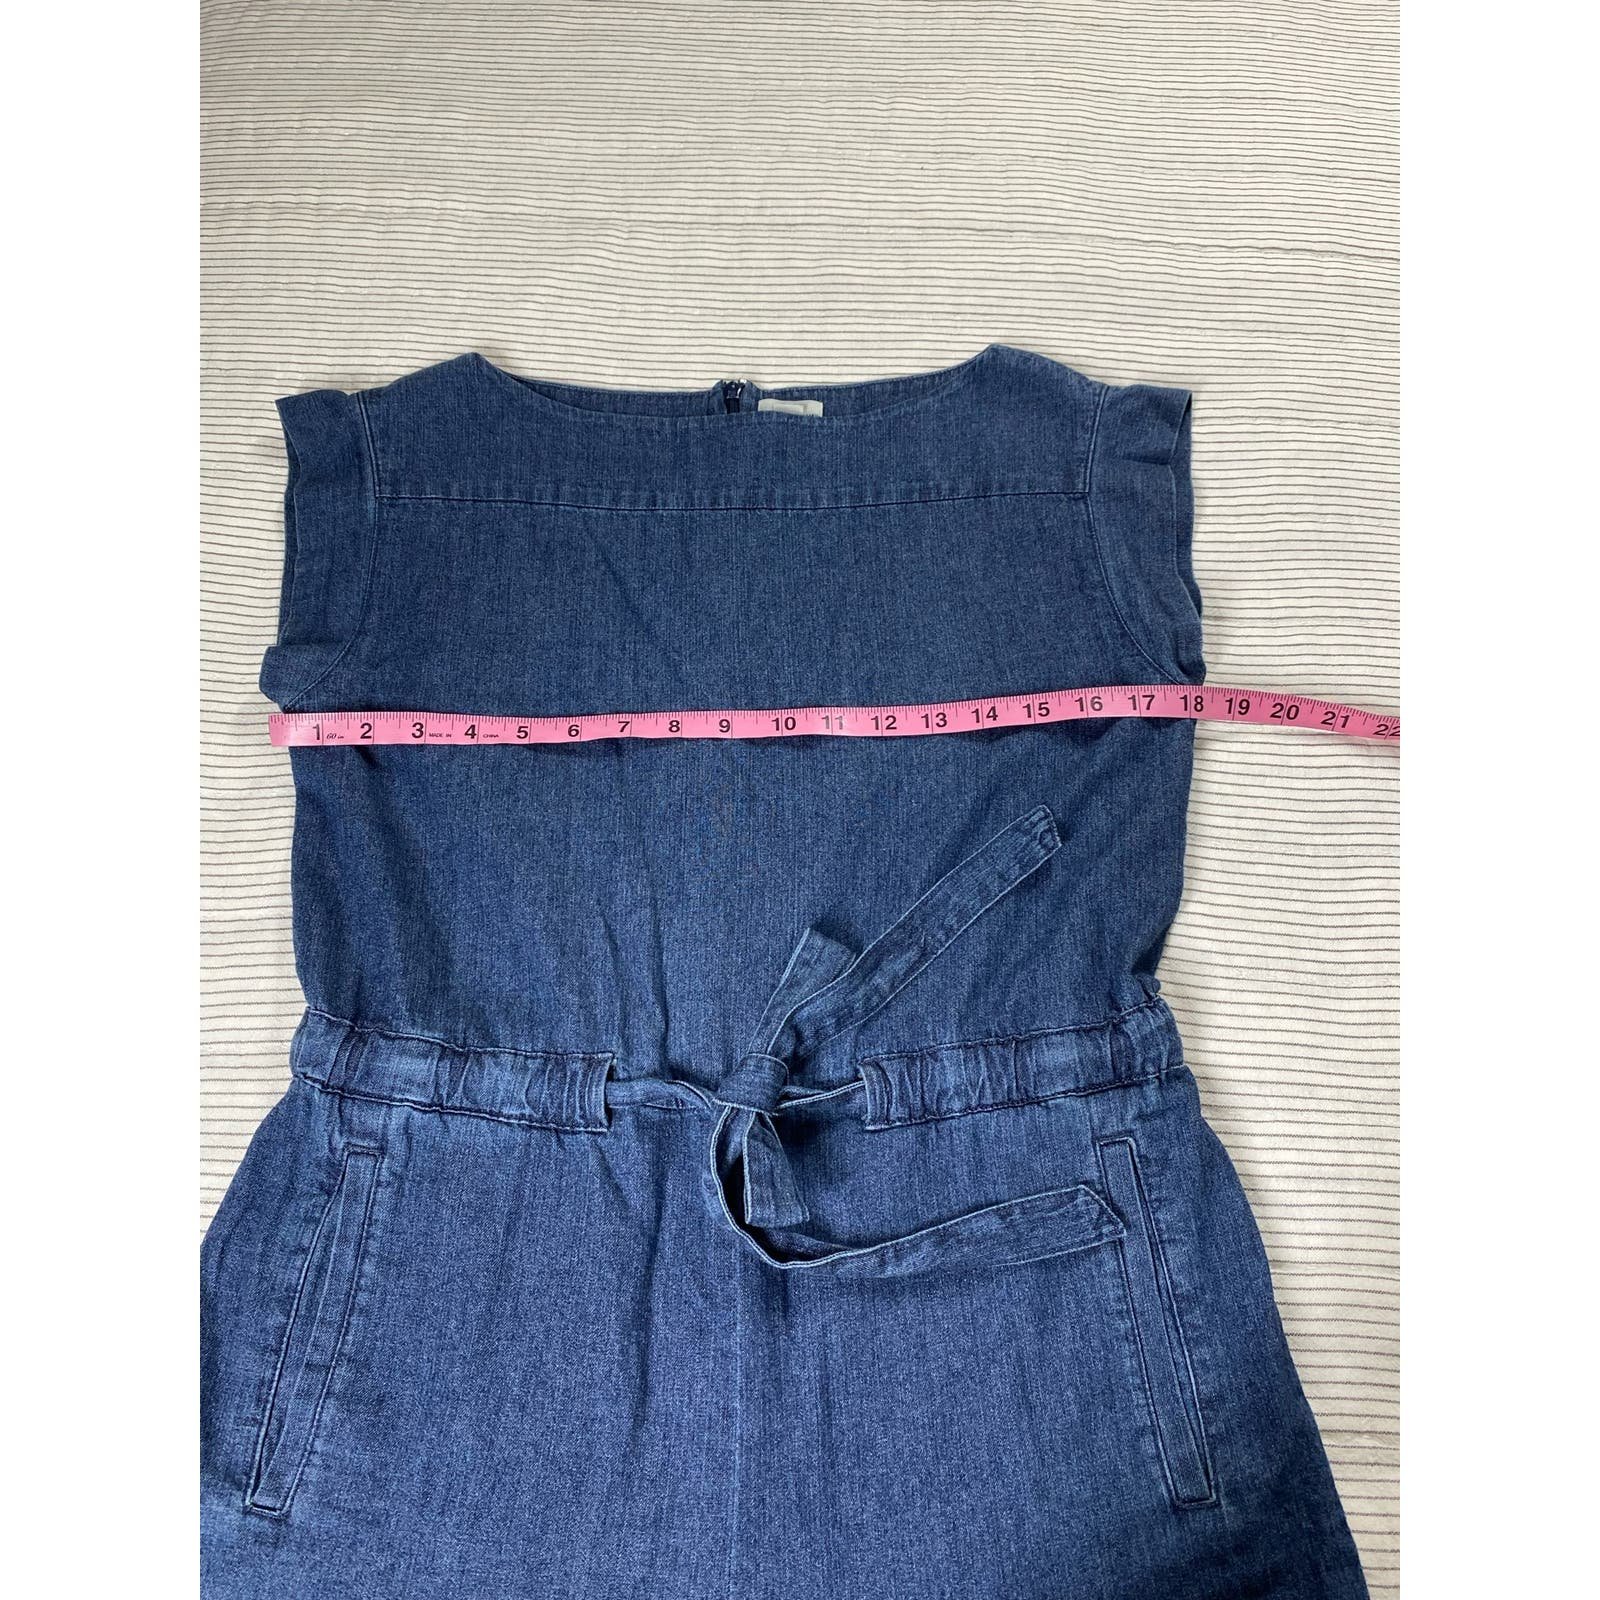 Fashion J. Crew Boatneck Jumpsuit In Chambray Denim Size 4 o1xU187e8 just buy it